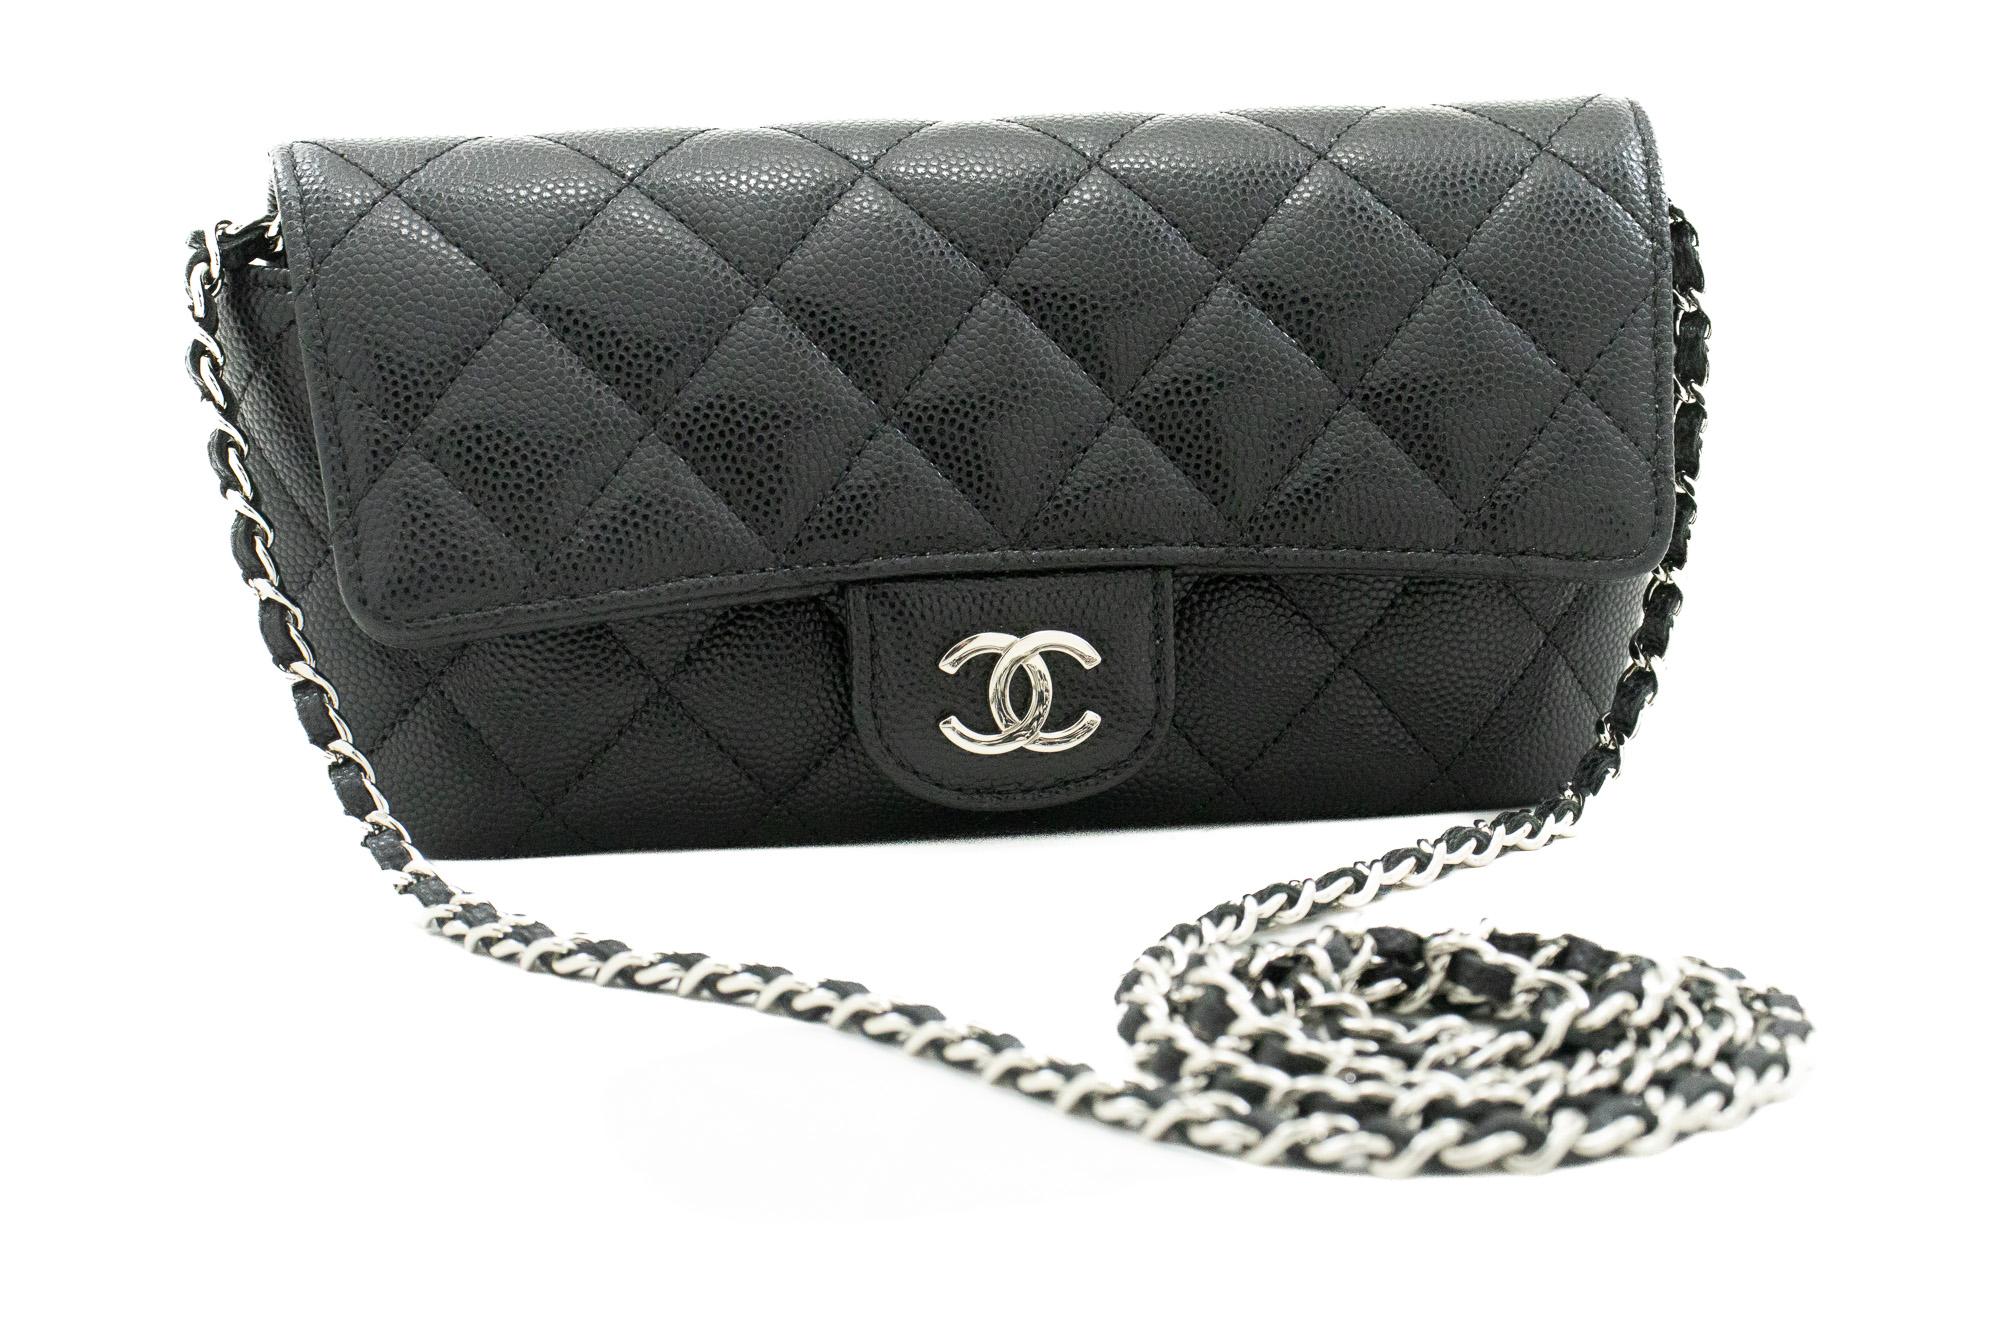 An authentic CHANEL Flap Phone Holder With Chain Bag Black Crossbody Clutch. The color is Black. The outside material is Leather. The pattern is Solid. This item is Contemporary. The year of manufacture would be 2021.
Conditions & Ratings
Outside